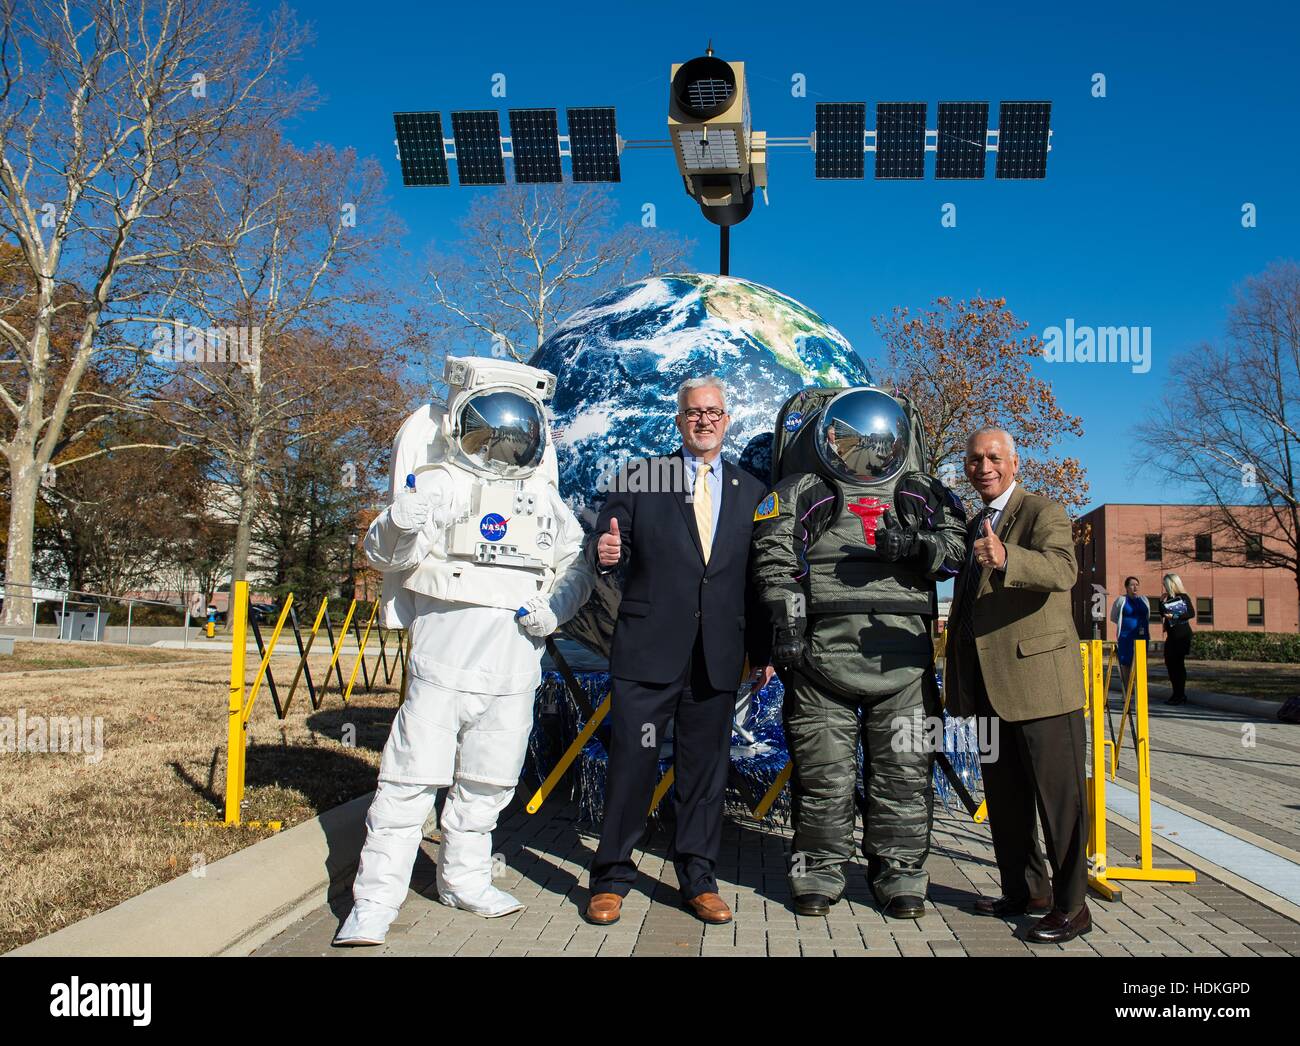 Langley Research Center Director Dr. David Bowles (left) and NASA Administrator Charles Bolden pose with astronaut mascots in spacesuits during the Centennial Float at the Langley Research Center December 1, 2016 in Hampton, Virginia. Stock Photo